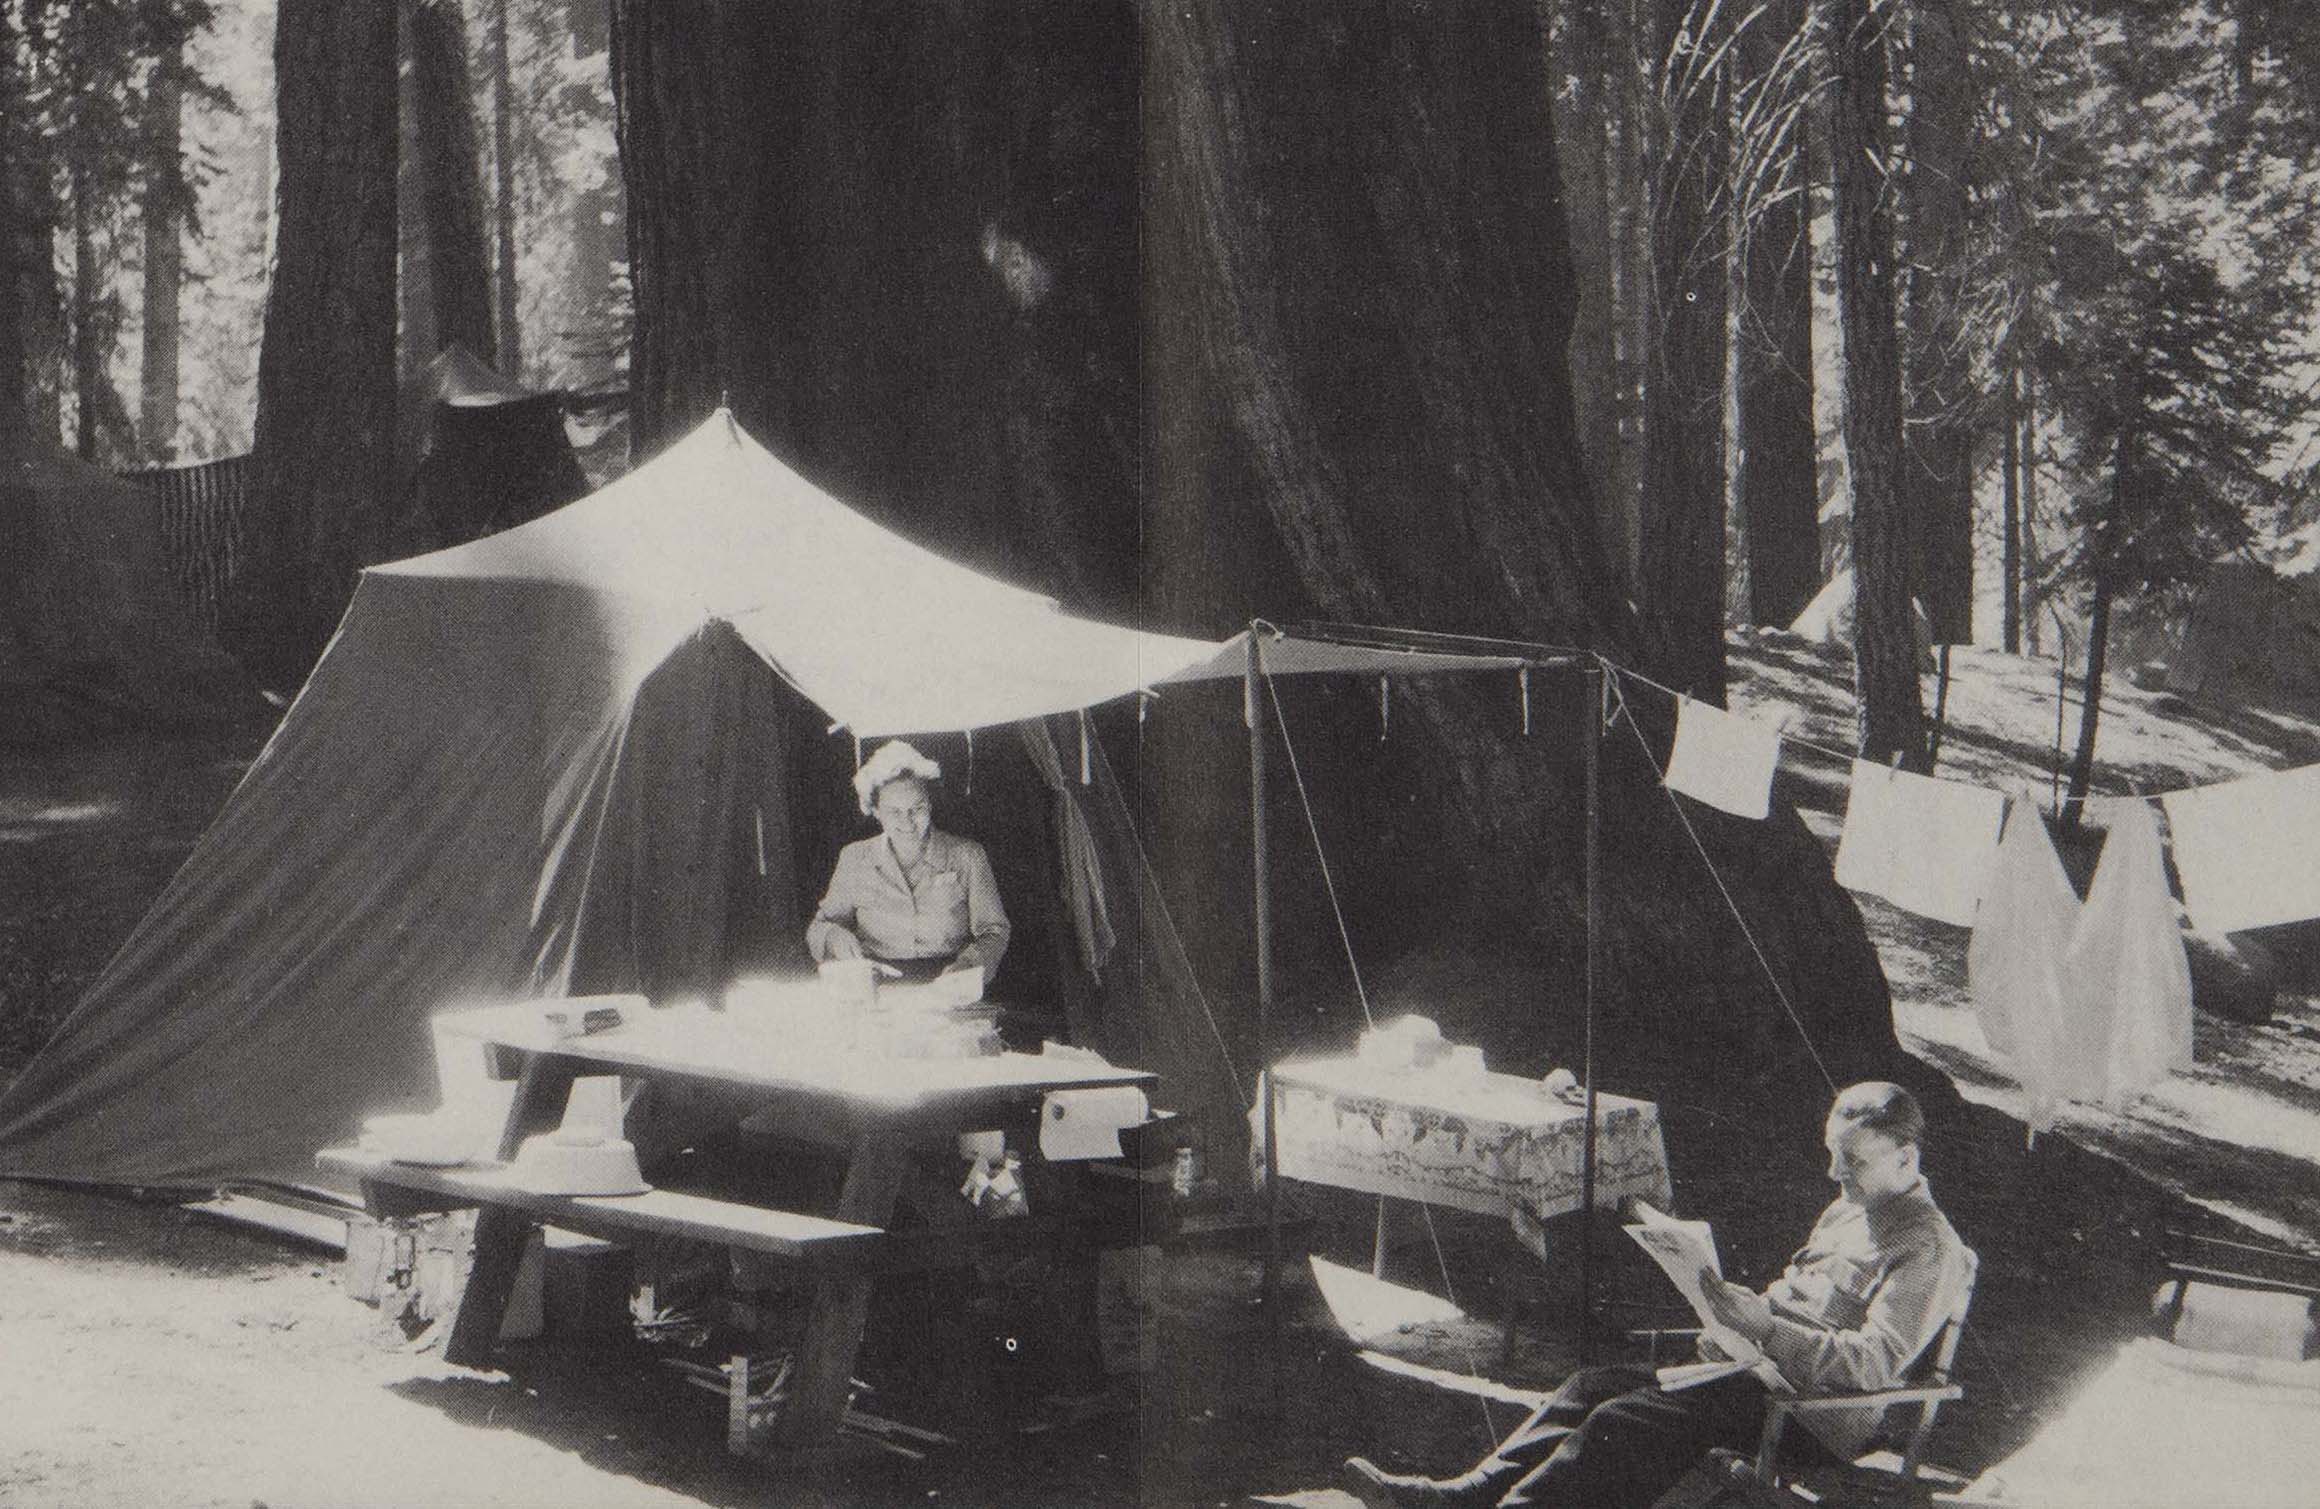 Firewood Camp, Giant Forest, Sequoia National Park